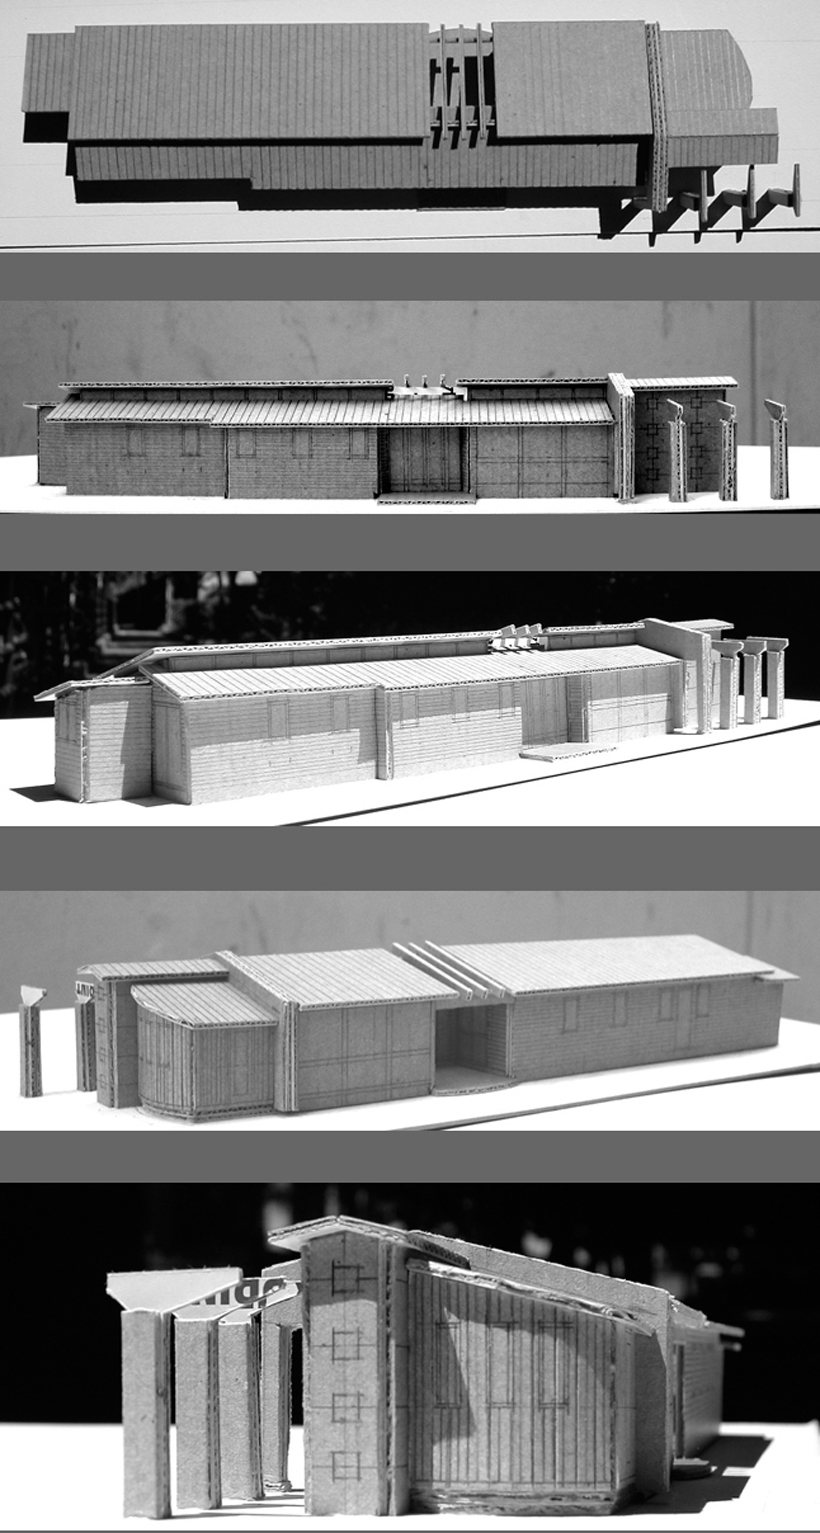 Faculty House, ENR architects with Topos Architects, Palo Alto, CA 94306 - Study Model